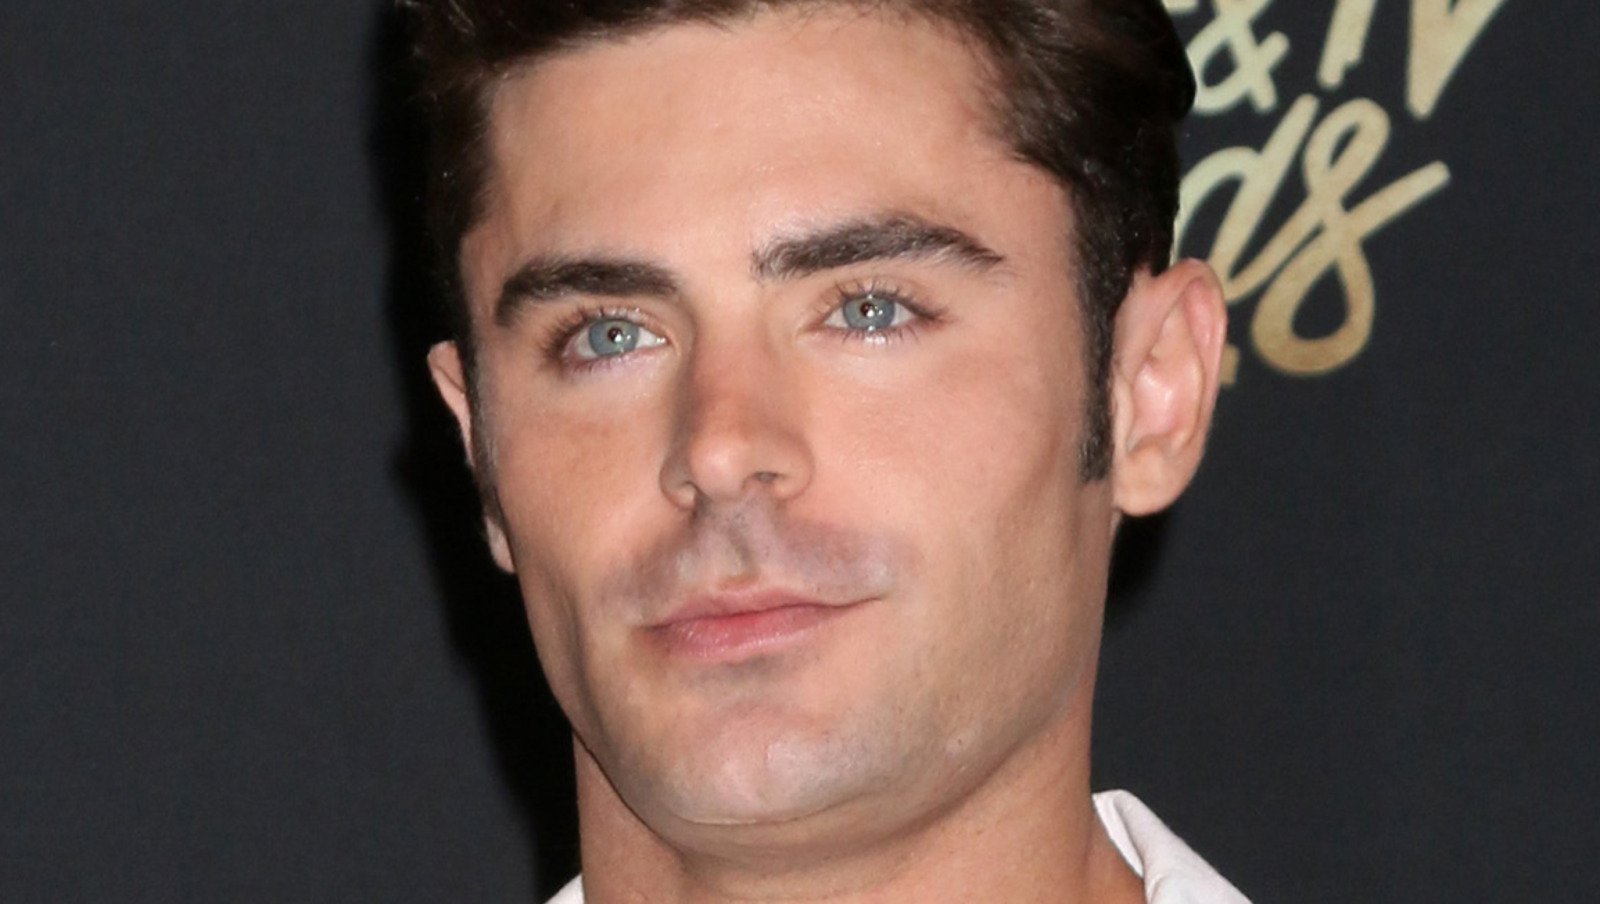 Zac Efron's Friend Opens Up About His Alleged Plastic Surgery